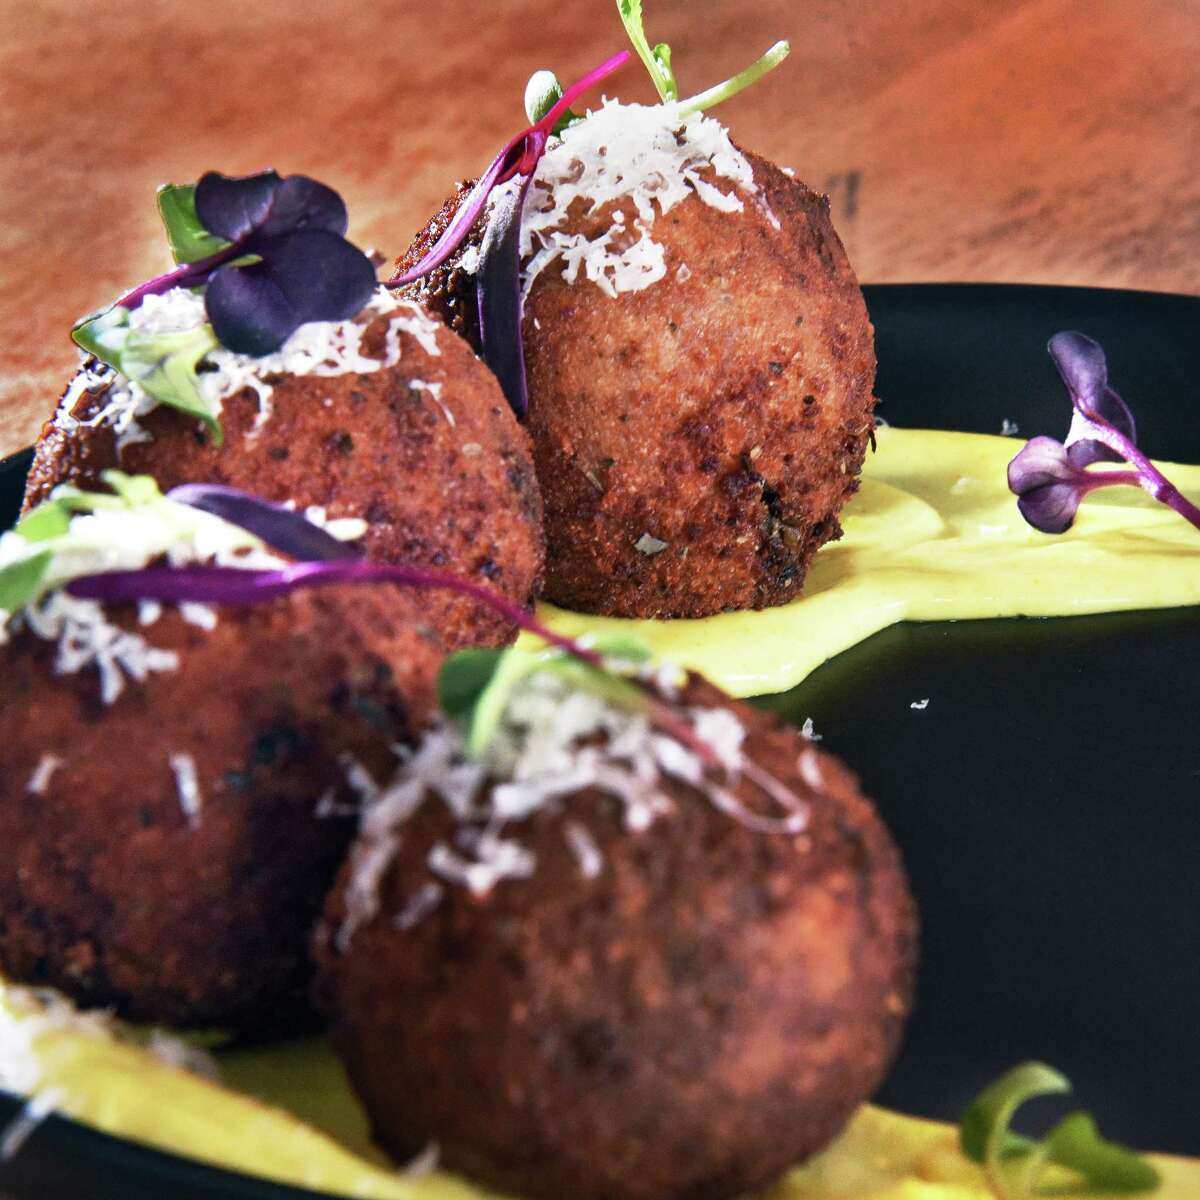 Arancini at Caskade Kitchen & Bar on Remsen Street Wednesday March 21, 2018 in Cohoes, NY. (John Carl D'Annibale/Times Union)